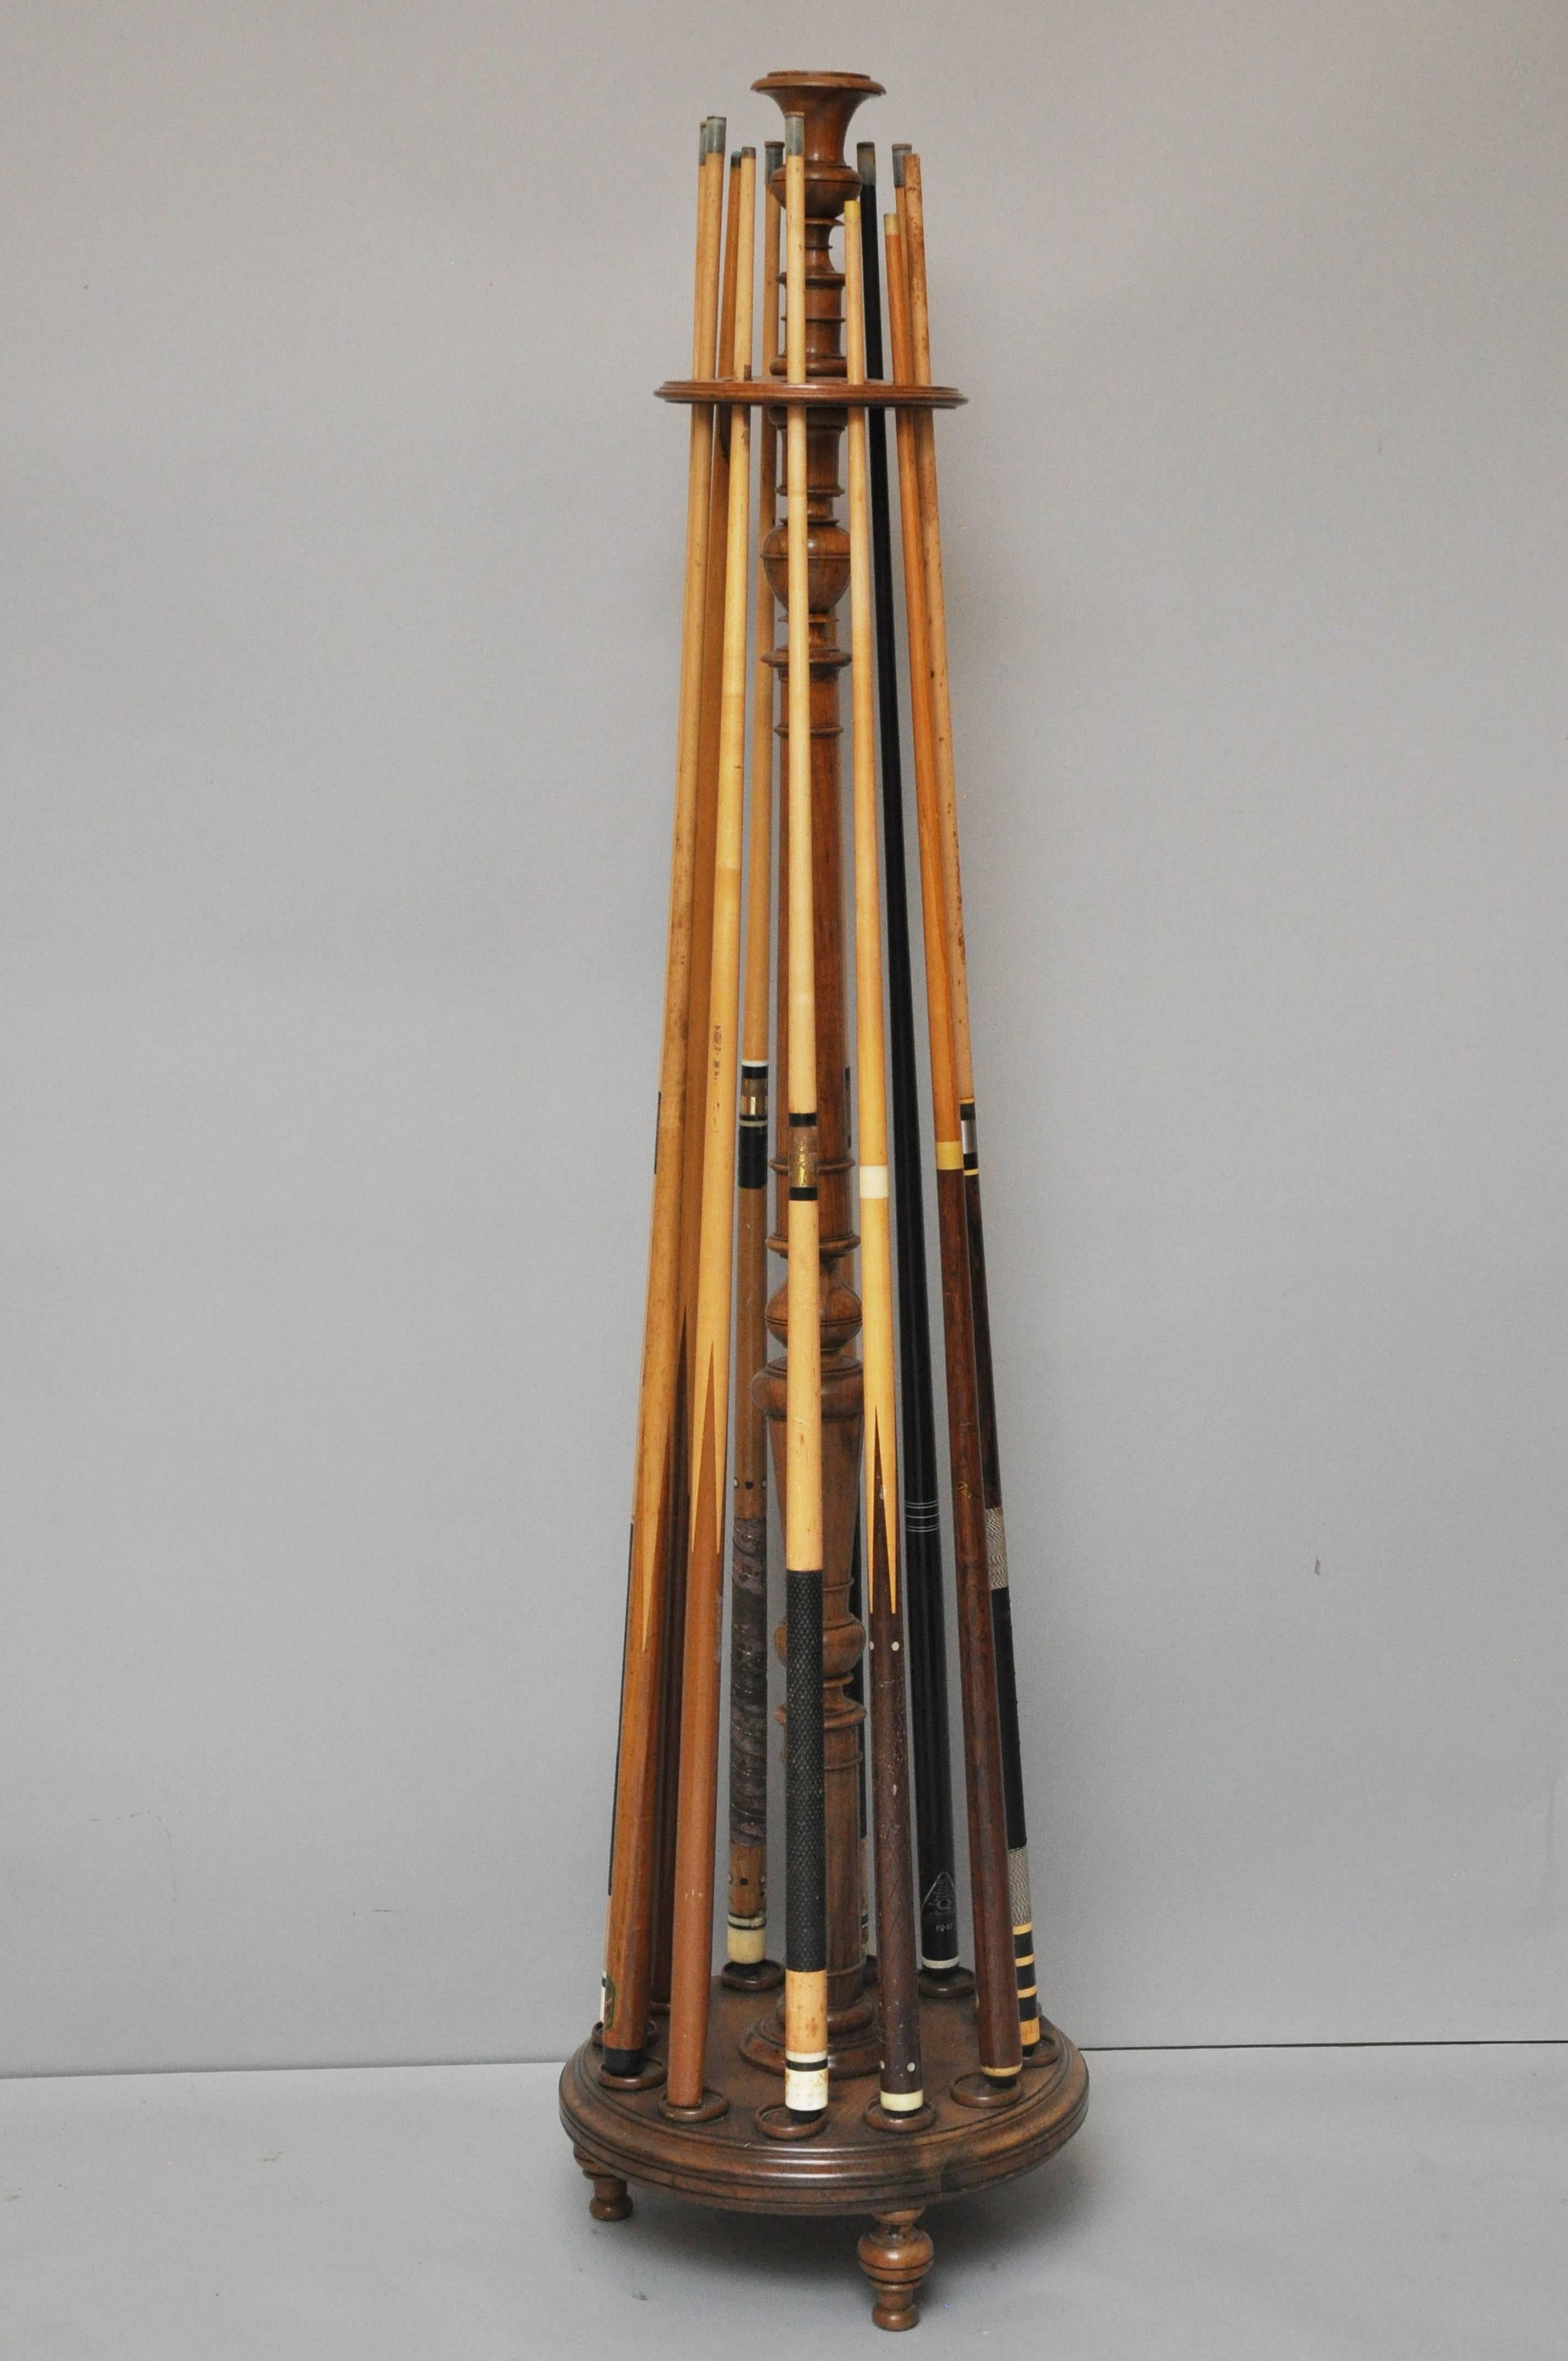 19th century French snooker or billiards cue stand. Free standing frame holds up to 12 cues, circular platform contains round inserts to hold cues in place, rests on three turned bulbous feet. Top shelf supports an epergne used to hold chalk.
    